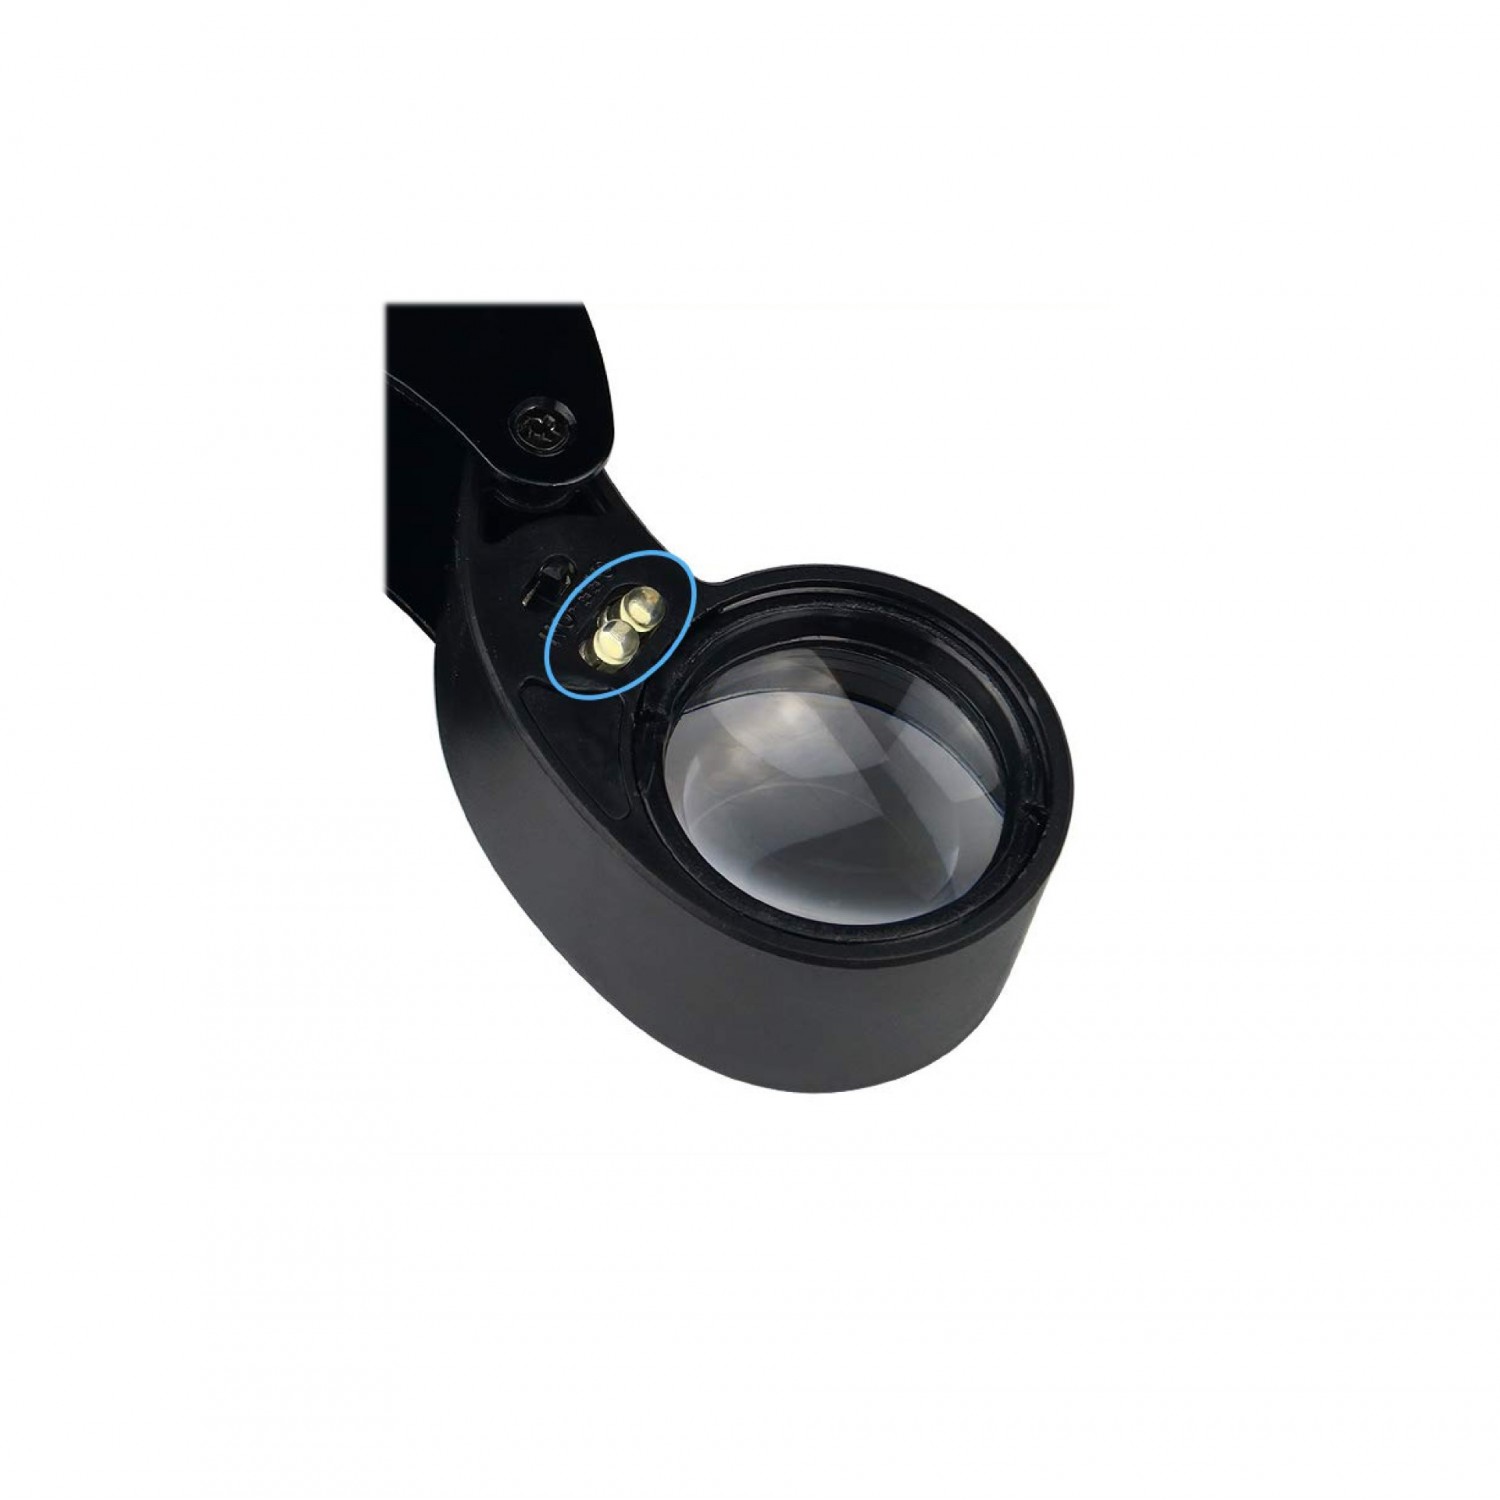 25-mm Loupe with LED